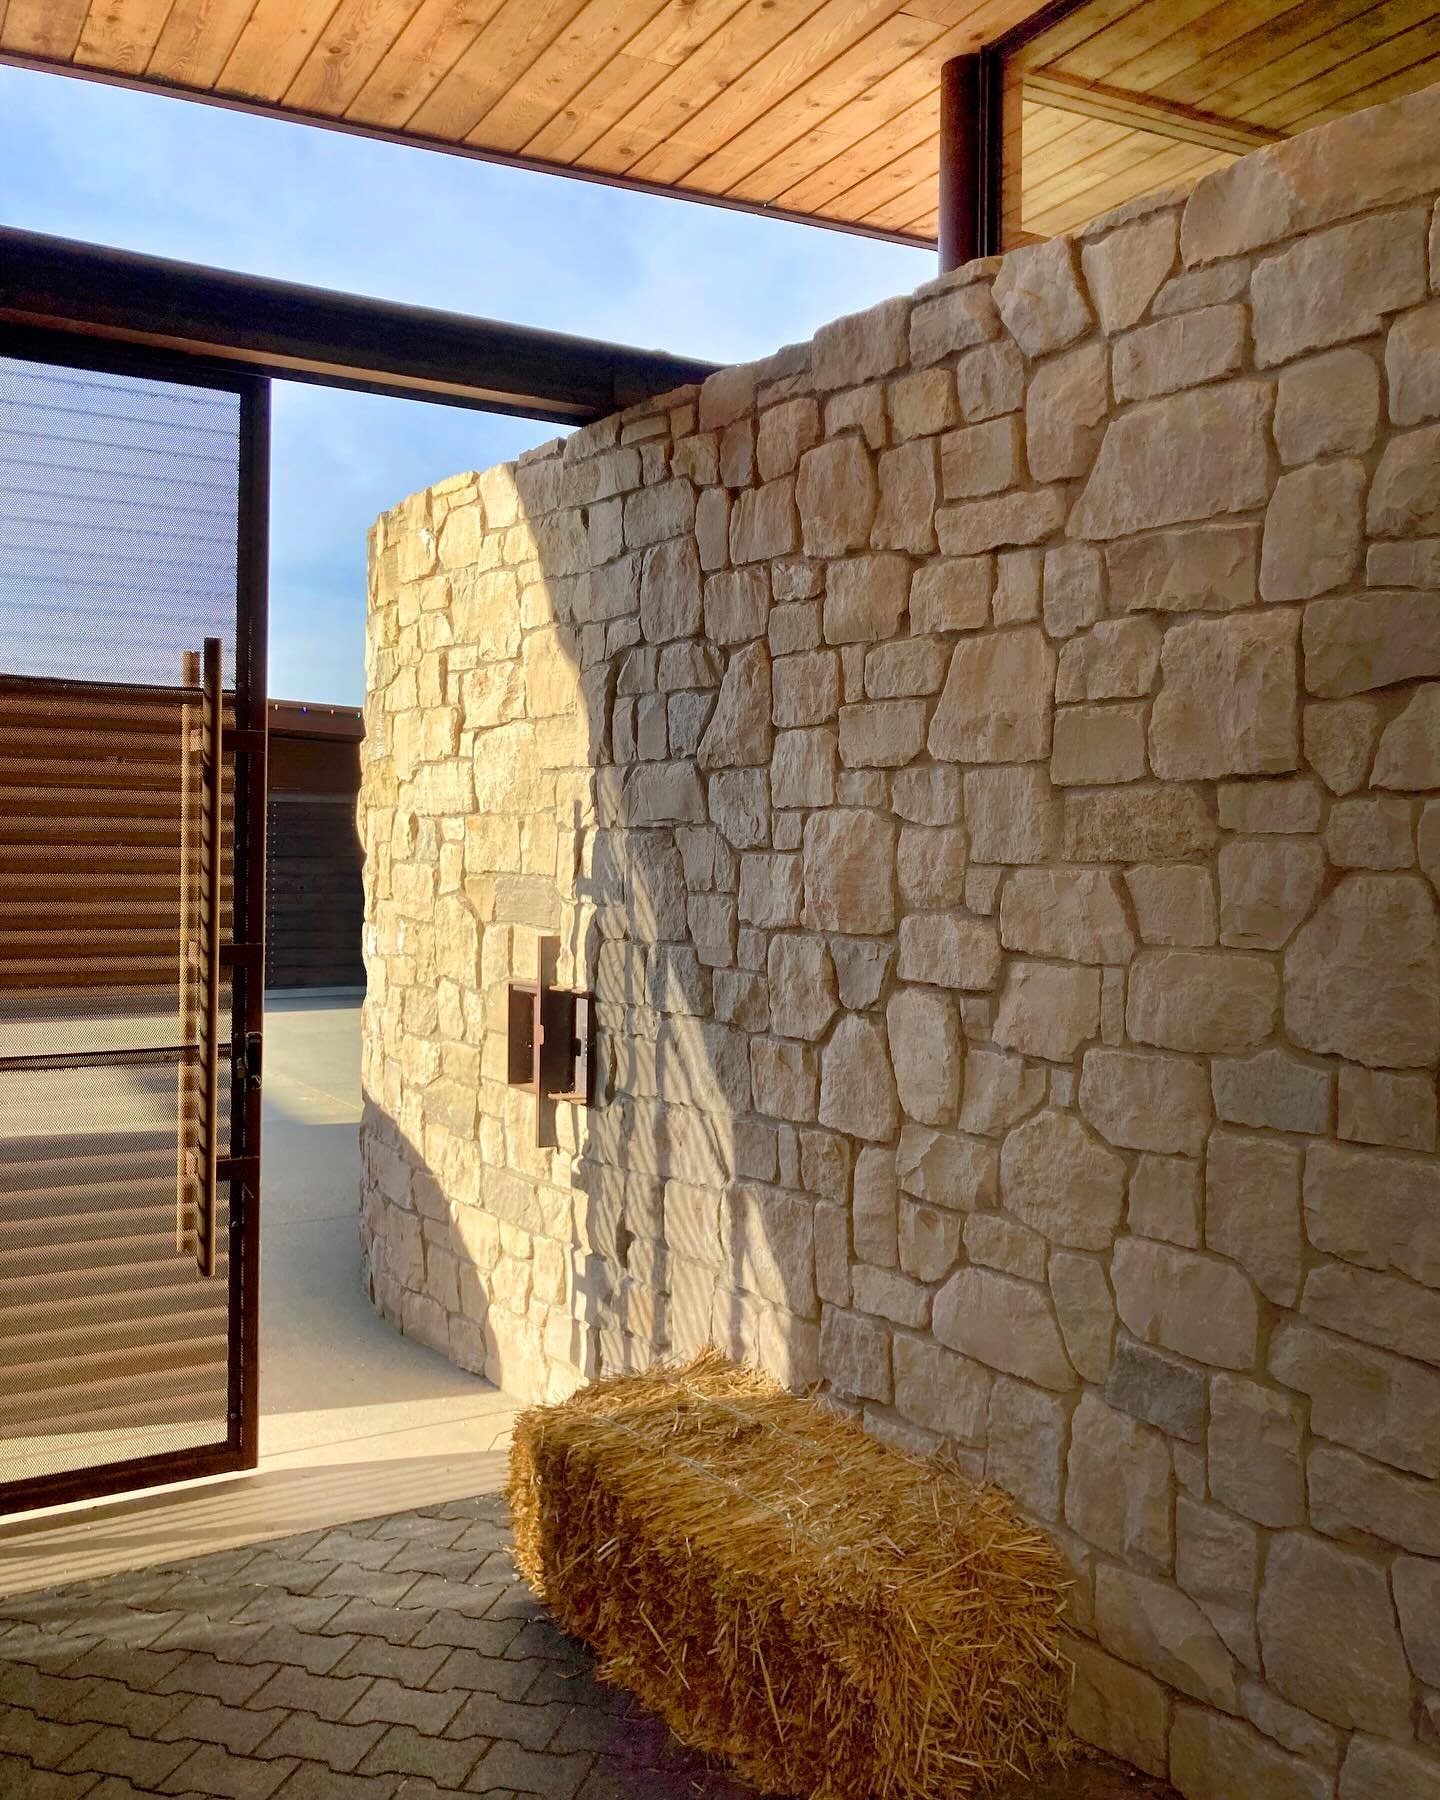 Sunlight bathes the warm limestone&nbsp;and perforated&nbsp;weathered steel within the stable at our #MCT_IslandEquestrian estate. The 5-acre estate, located on Mercer Island,&nbsp;features a stable, arena, caretaker&rsquo;s residence, and workshop a